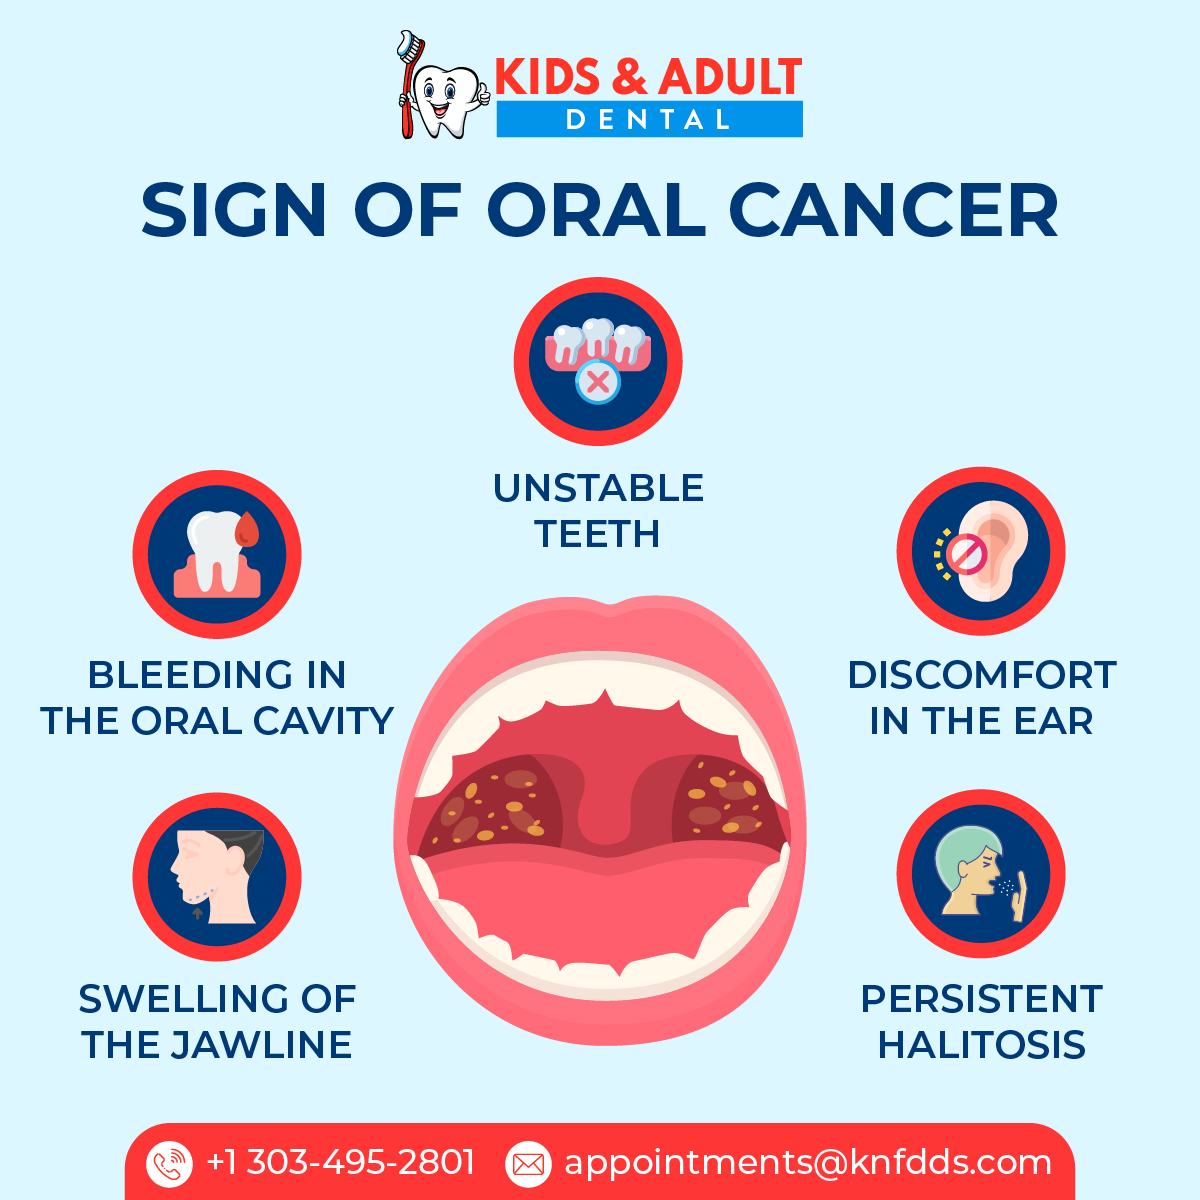 RT@DrFereydouni Don't turn a blind eye to oral health! This #OralCancerAwarenessMonth, let's talk, check, and act. Early detection saves lives!  

#OralHealthMatters #BeyondBrushing #HealthySmileTips #DentalWellness #SmileGoals #OralCare #Knfdds